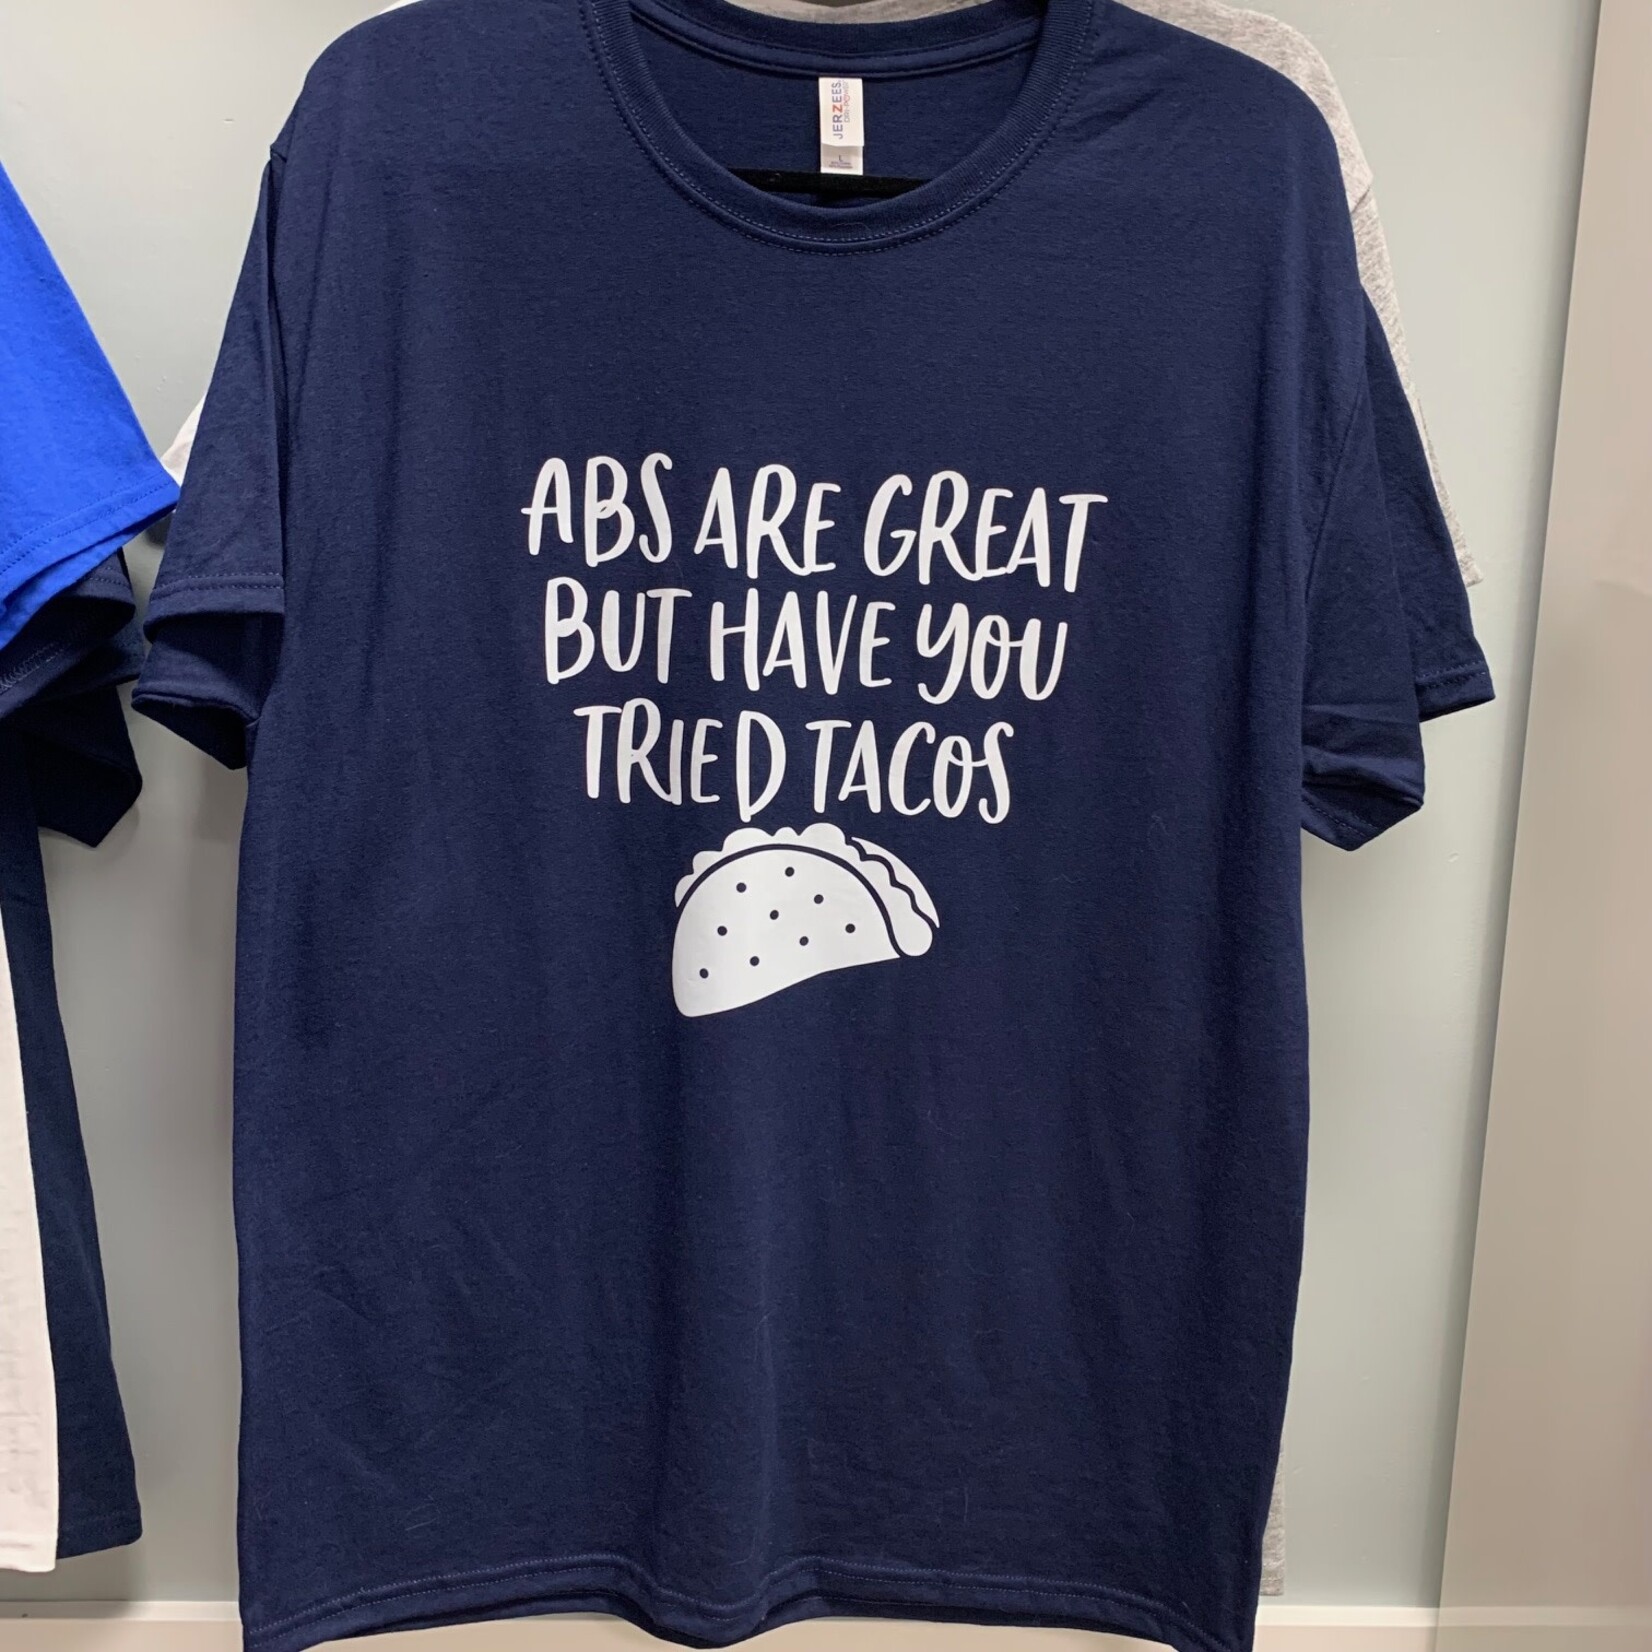 https://cdn.shoplightspeed.com/shops/660096/files/56311181/1652x1652x1/abs-are-great-but-have-you-tried-tacos-shirt.jpg